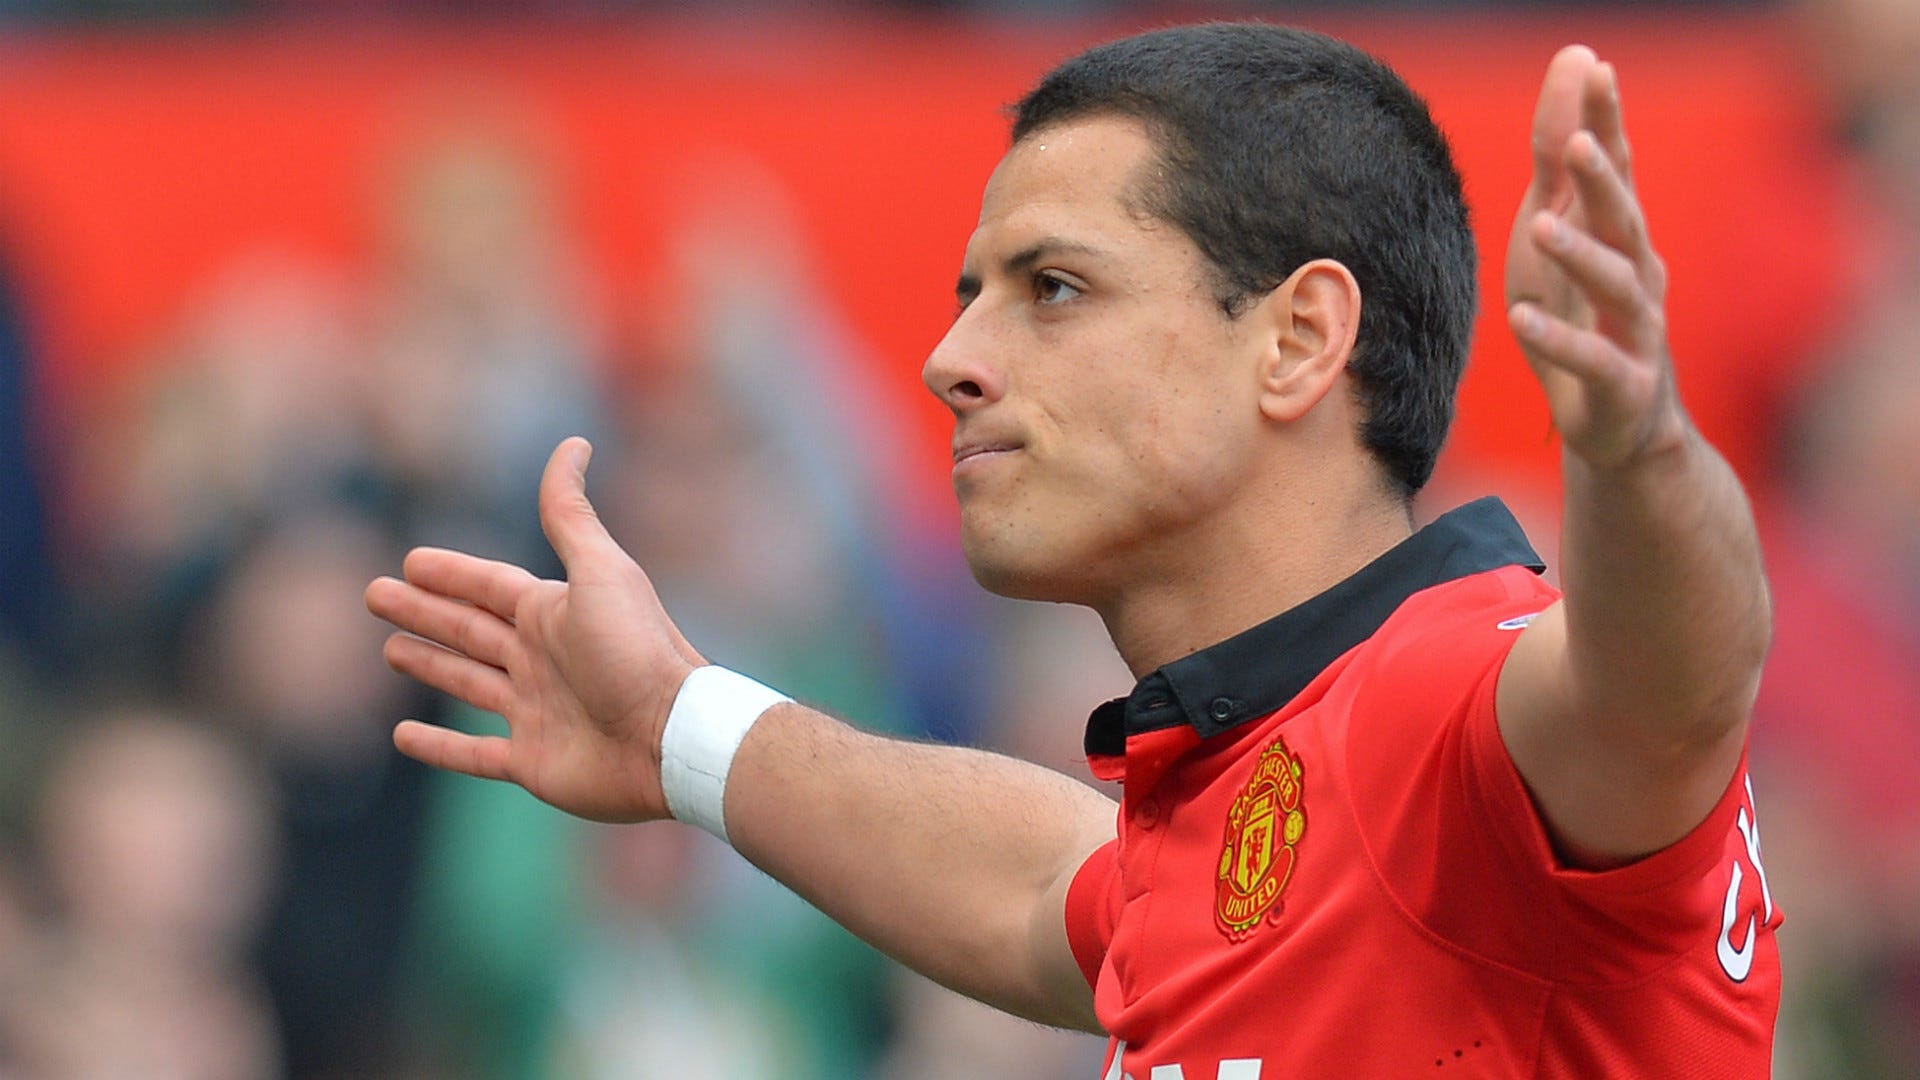 Chicharito reflects on 'bittersweet' Man Utd spell & refuses to rule out return to Europe from MLS | Goal.com